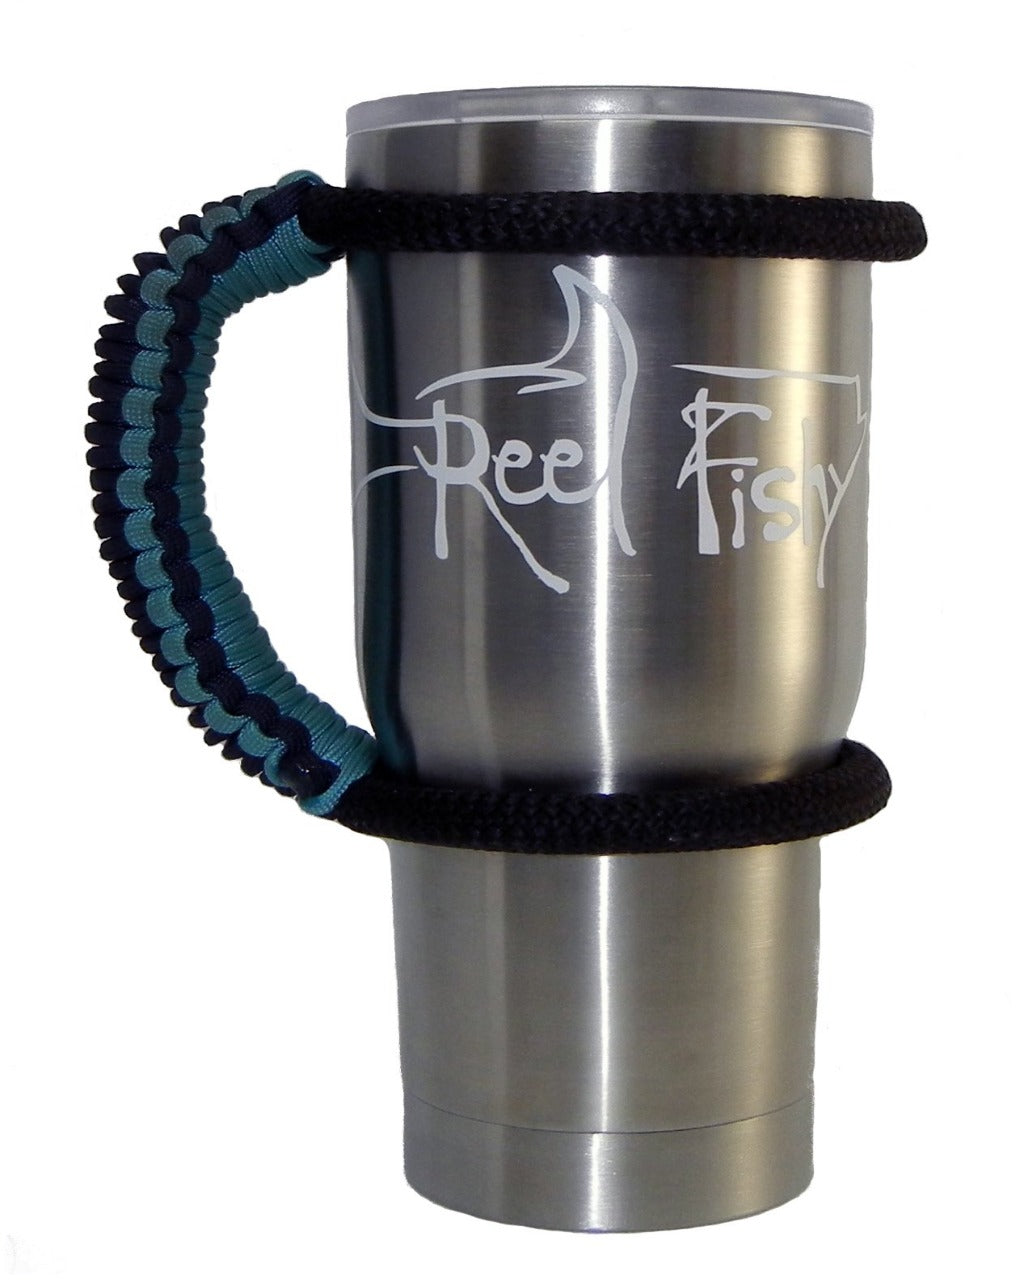 22oz Stainless Steel Tumbler with Tarpon decal - Comparable to